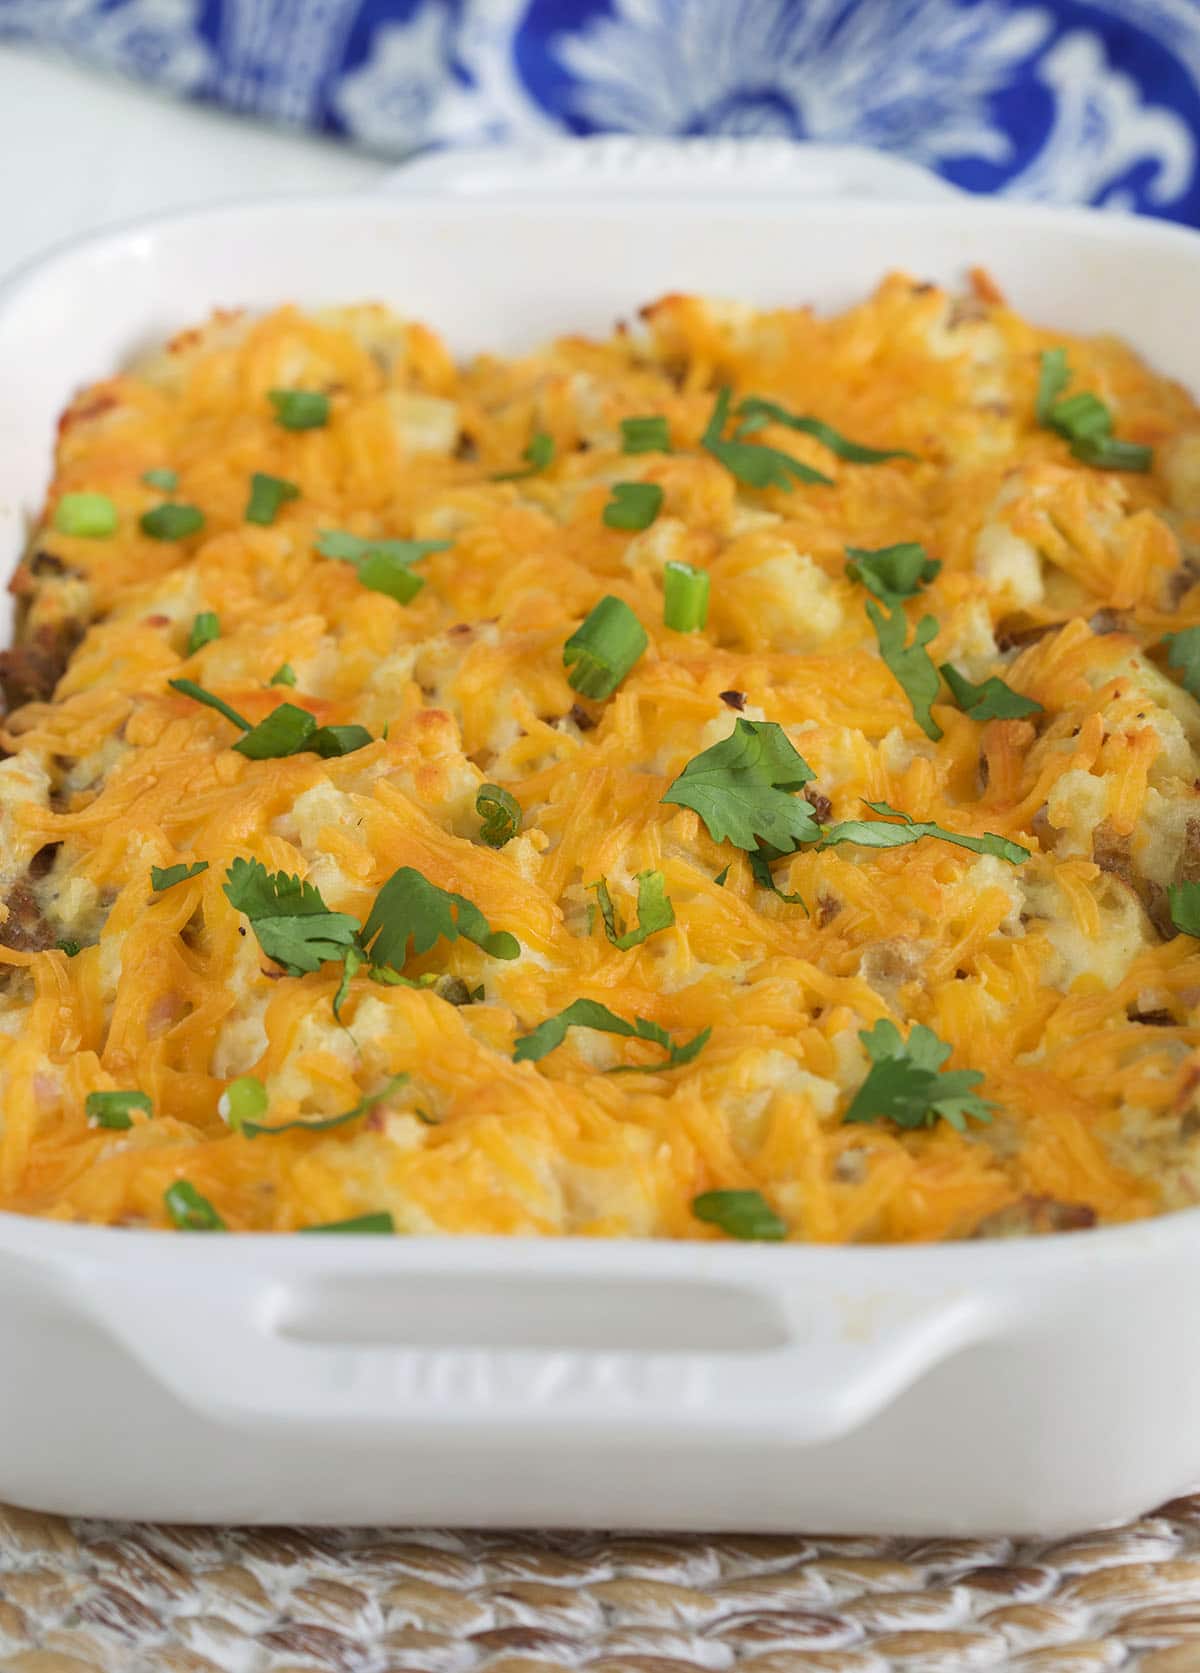 Baked potatoes and cheese are in a casserole dish.